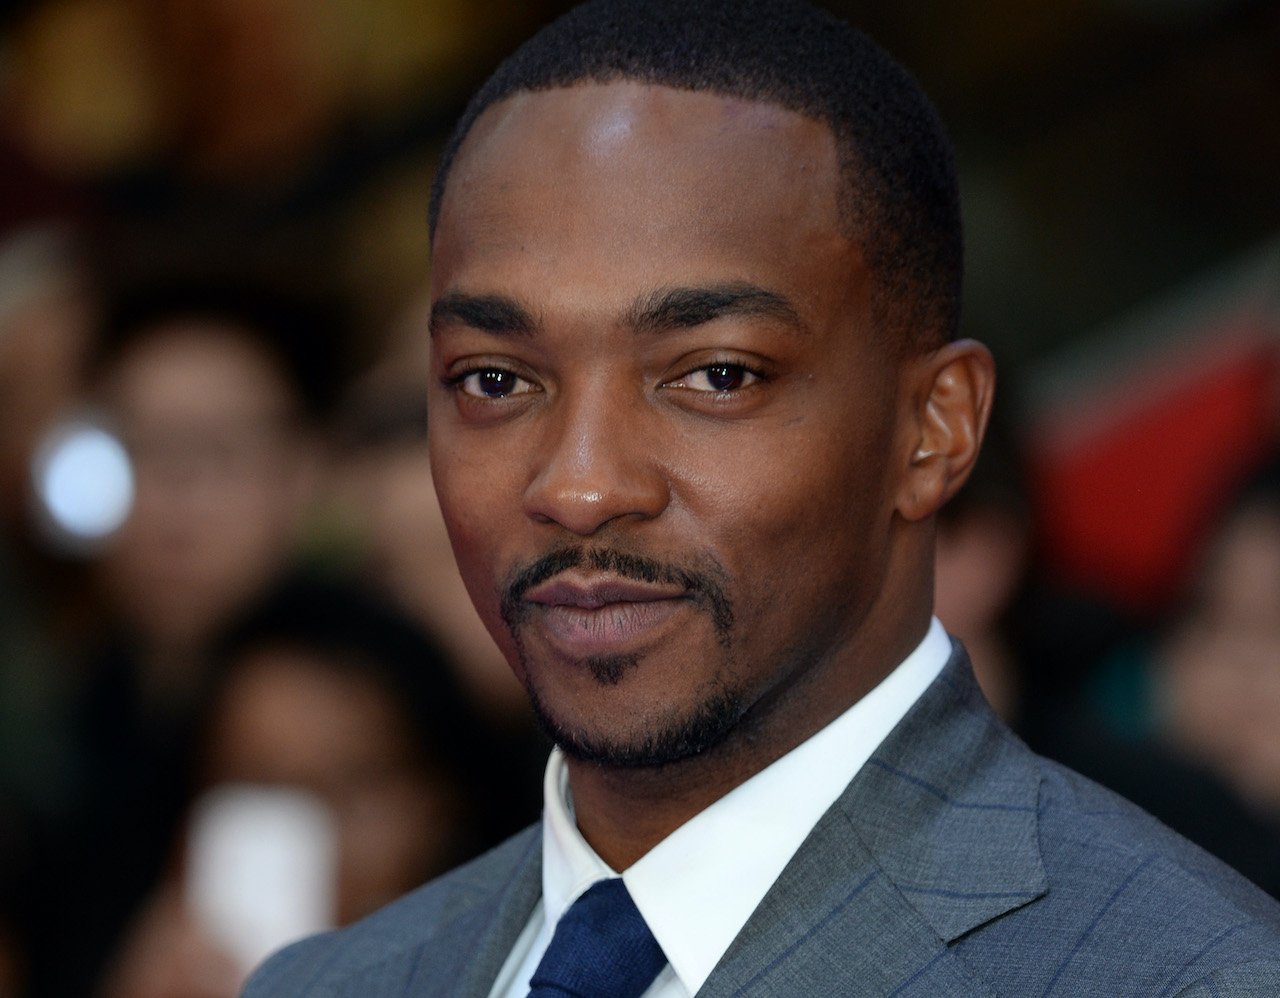 Anthony Mackie attends the European premiere of 'Captain America: Civil War'